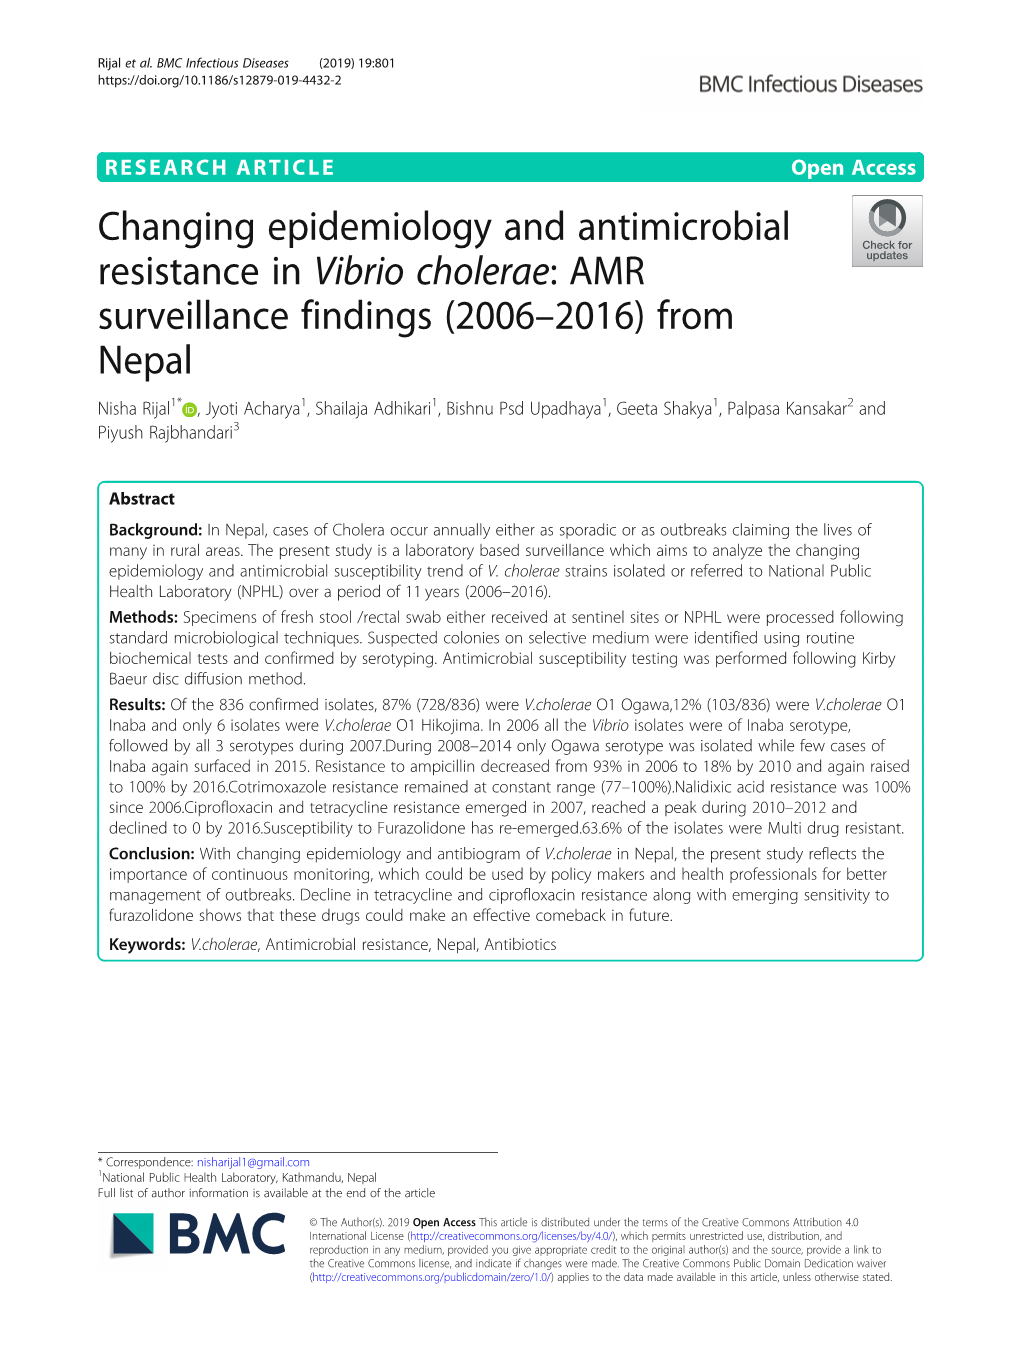 Changing Epidemiology and Antimicrobial Resistance in Vibrio Cholerae: AMR Surveillance Findings (2006–2016) from Nepal